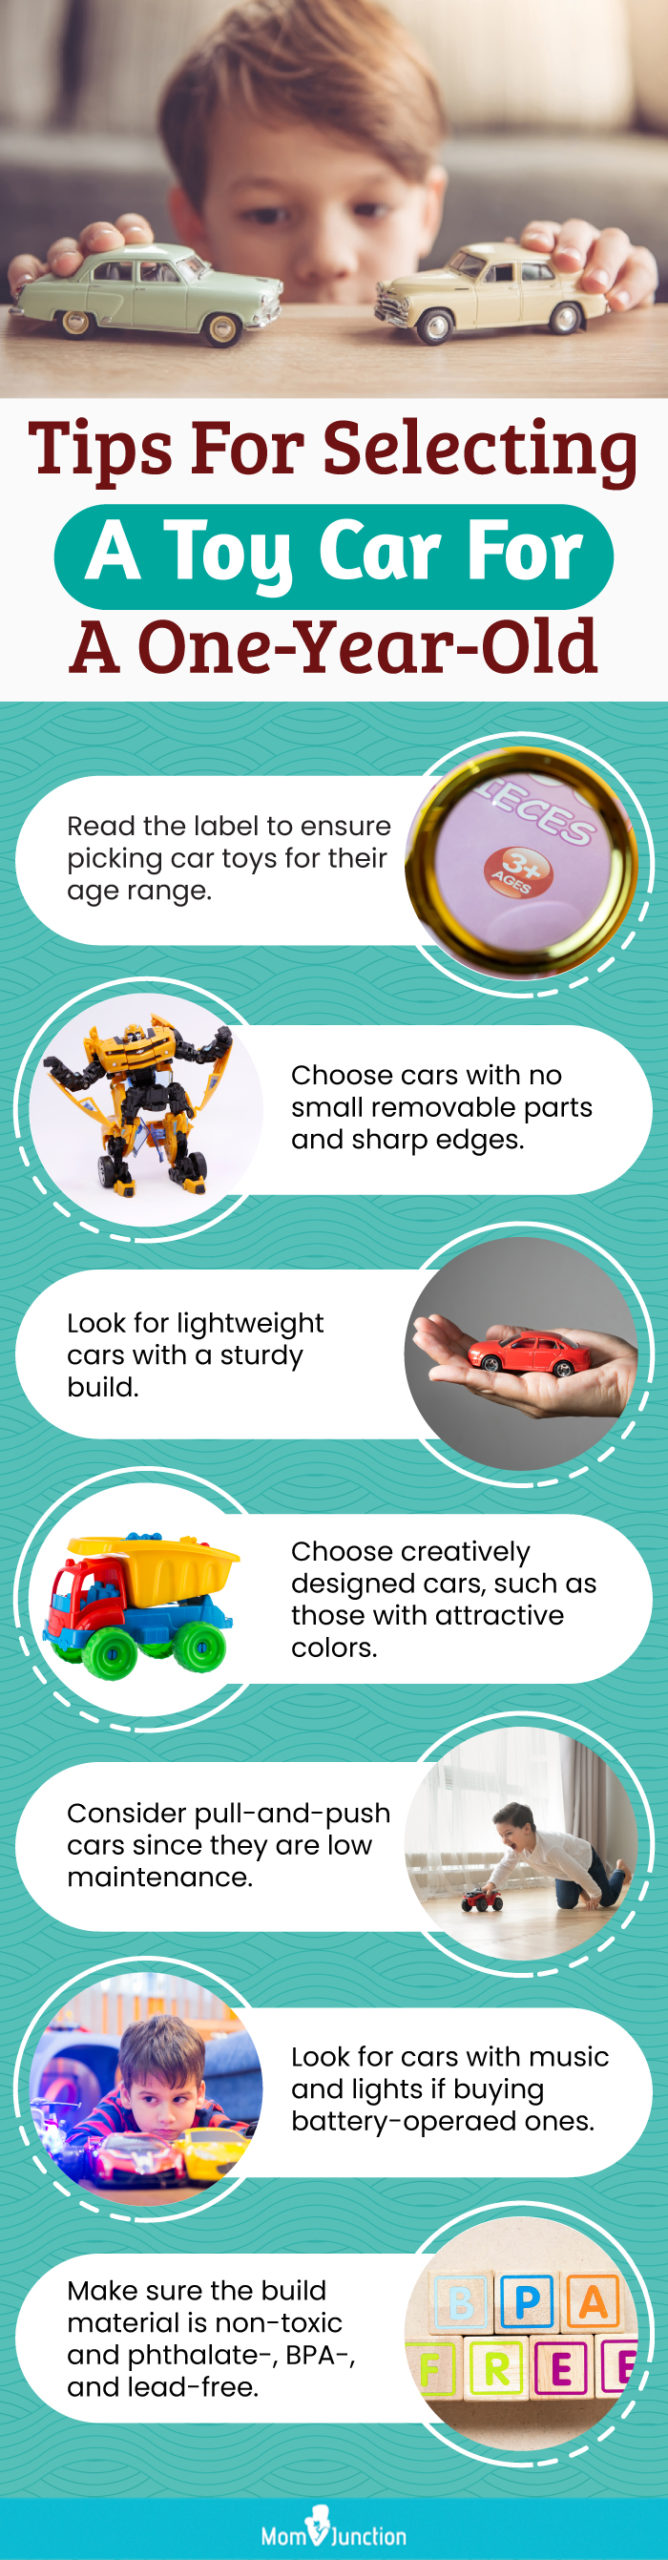 Tips For Selecting A Toy Car For A One Year Old. (infographic)